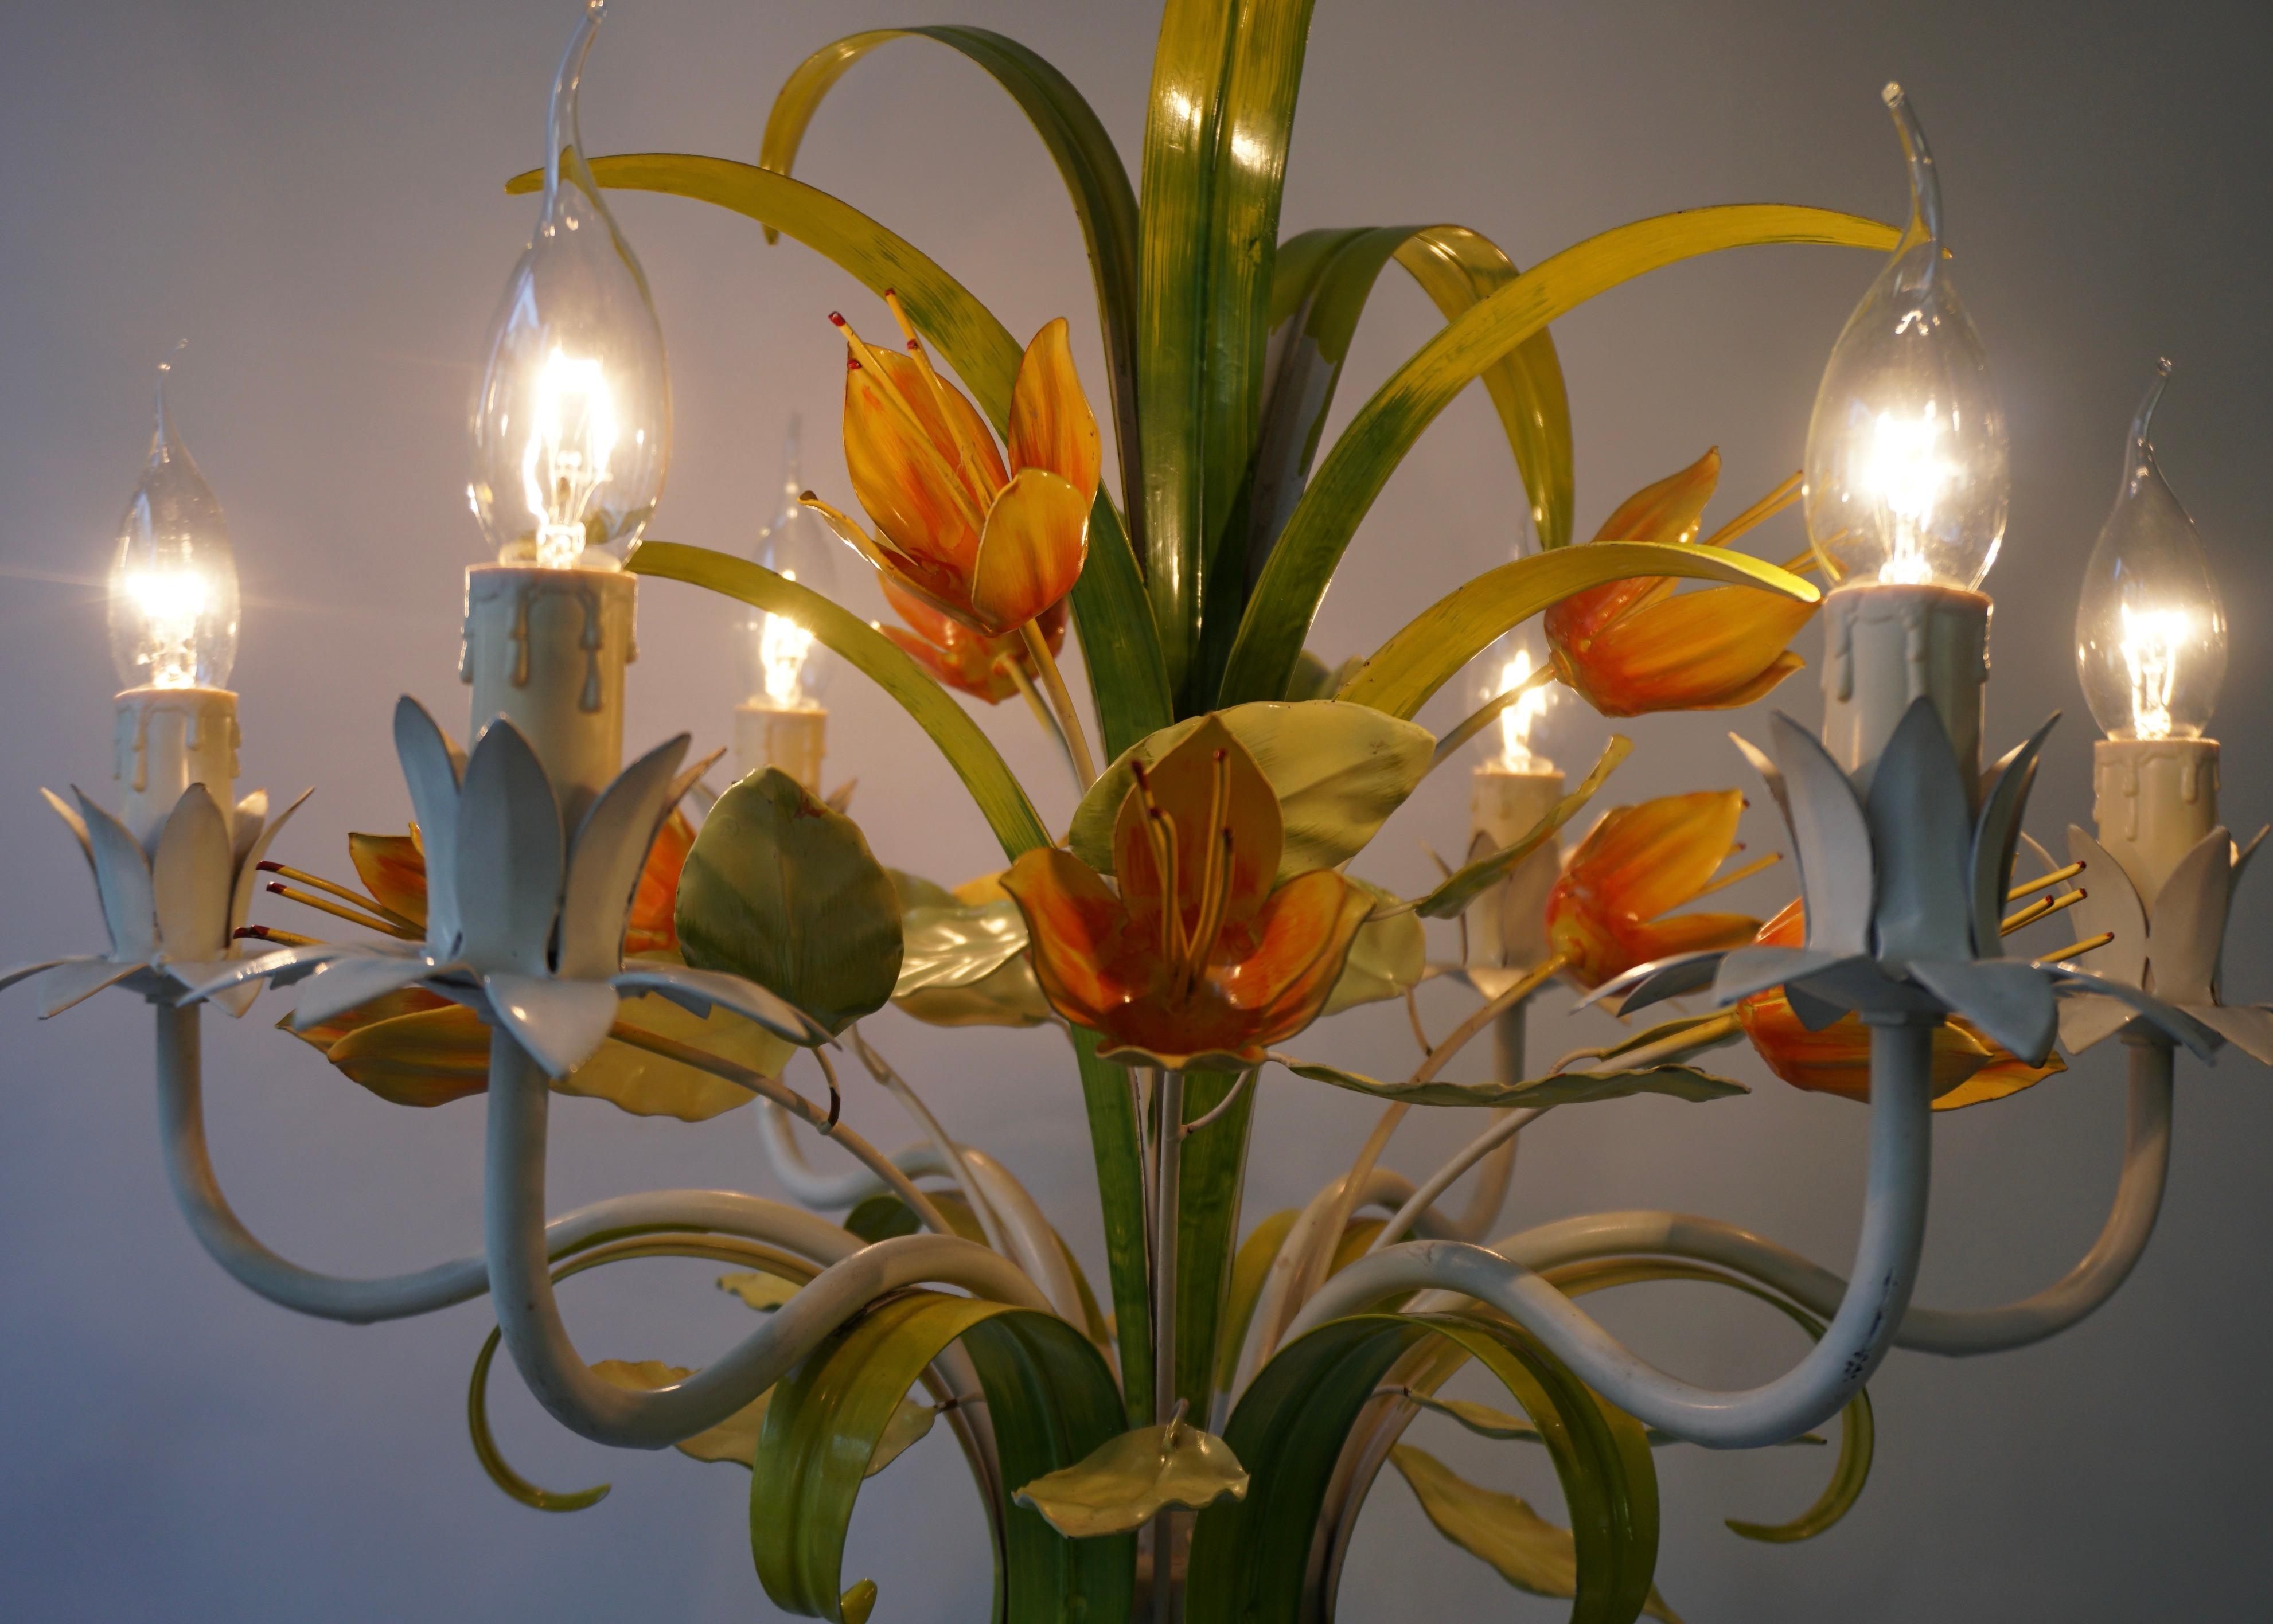 1960s Bright Boho Chic Italian Tole Painted Metal Chandelier With Floral Decor For Sale 10